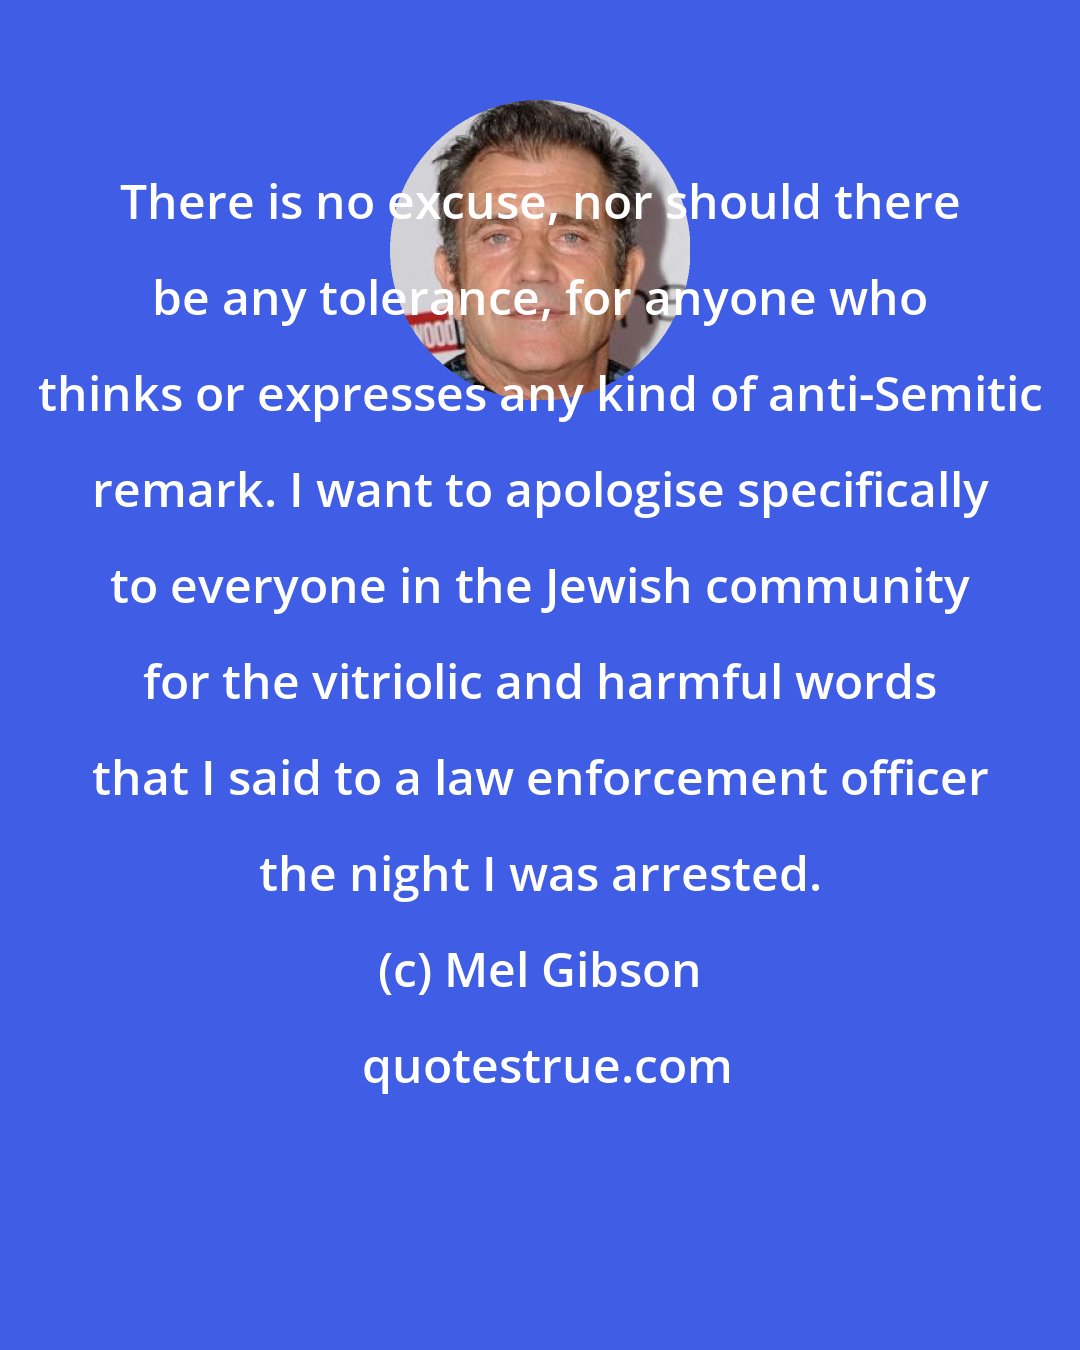 Mel Gibson: There is no excuse, nor should there be any tolerance, for anyone who thinks or expresses any kind of anti-Semitic remark. I want to apologise specifically to everyone in the Jewish community for the vitriolic and harmful words that I said to a law enforcement officer the night I was arrested.